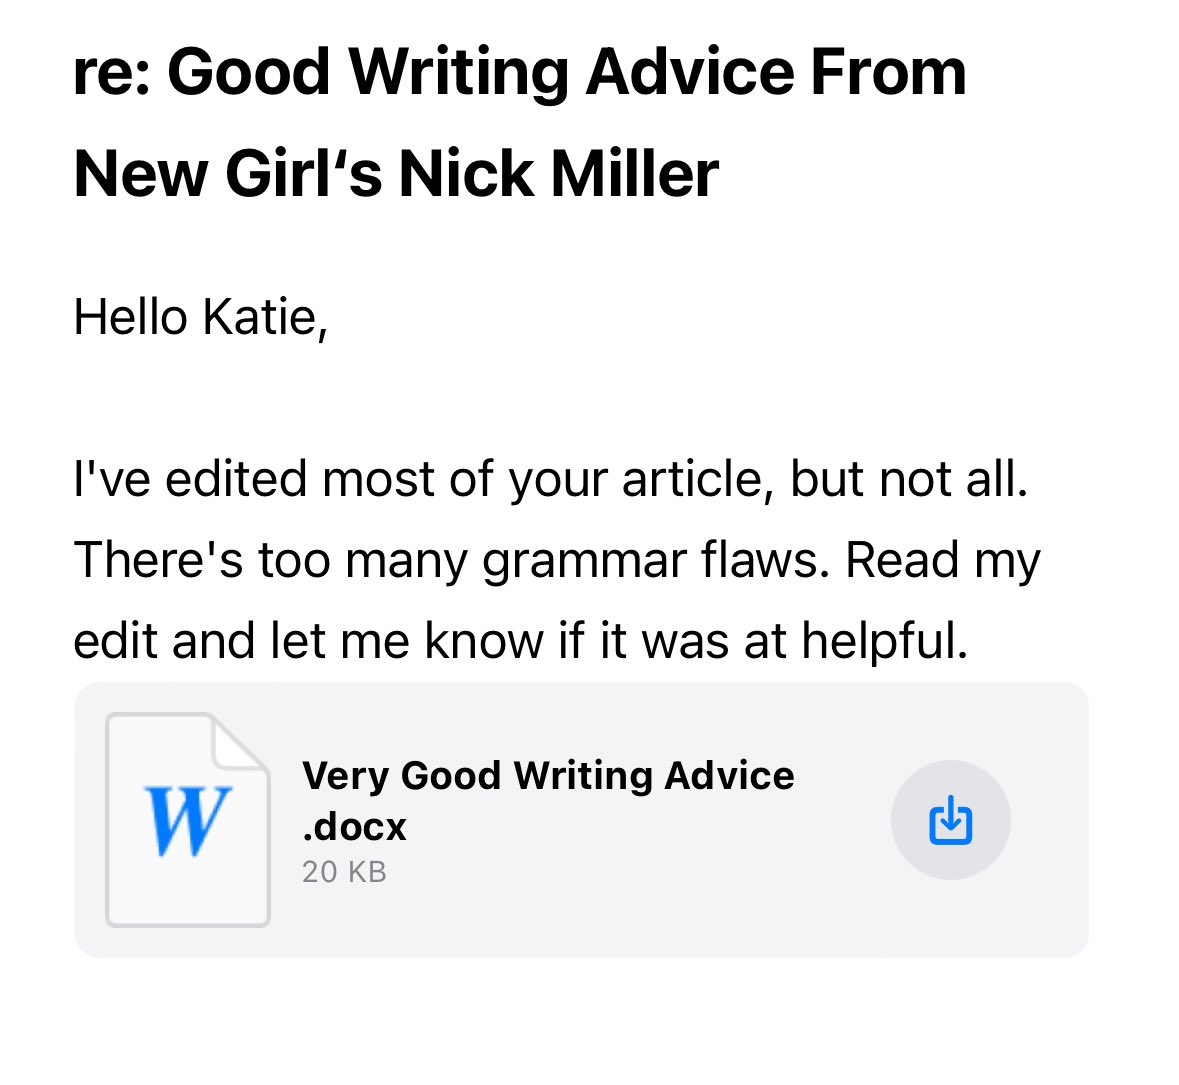 someone tell me why this man has emailed me just to correct my grammar on a silly lil blog post i wrote a few YEARS ago for a place i’m not working at